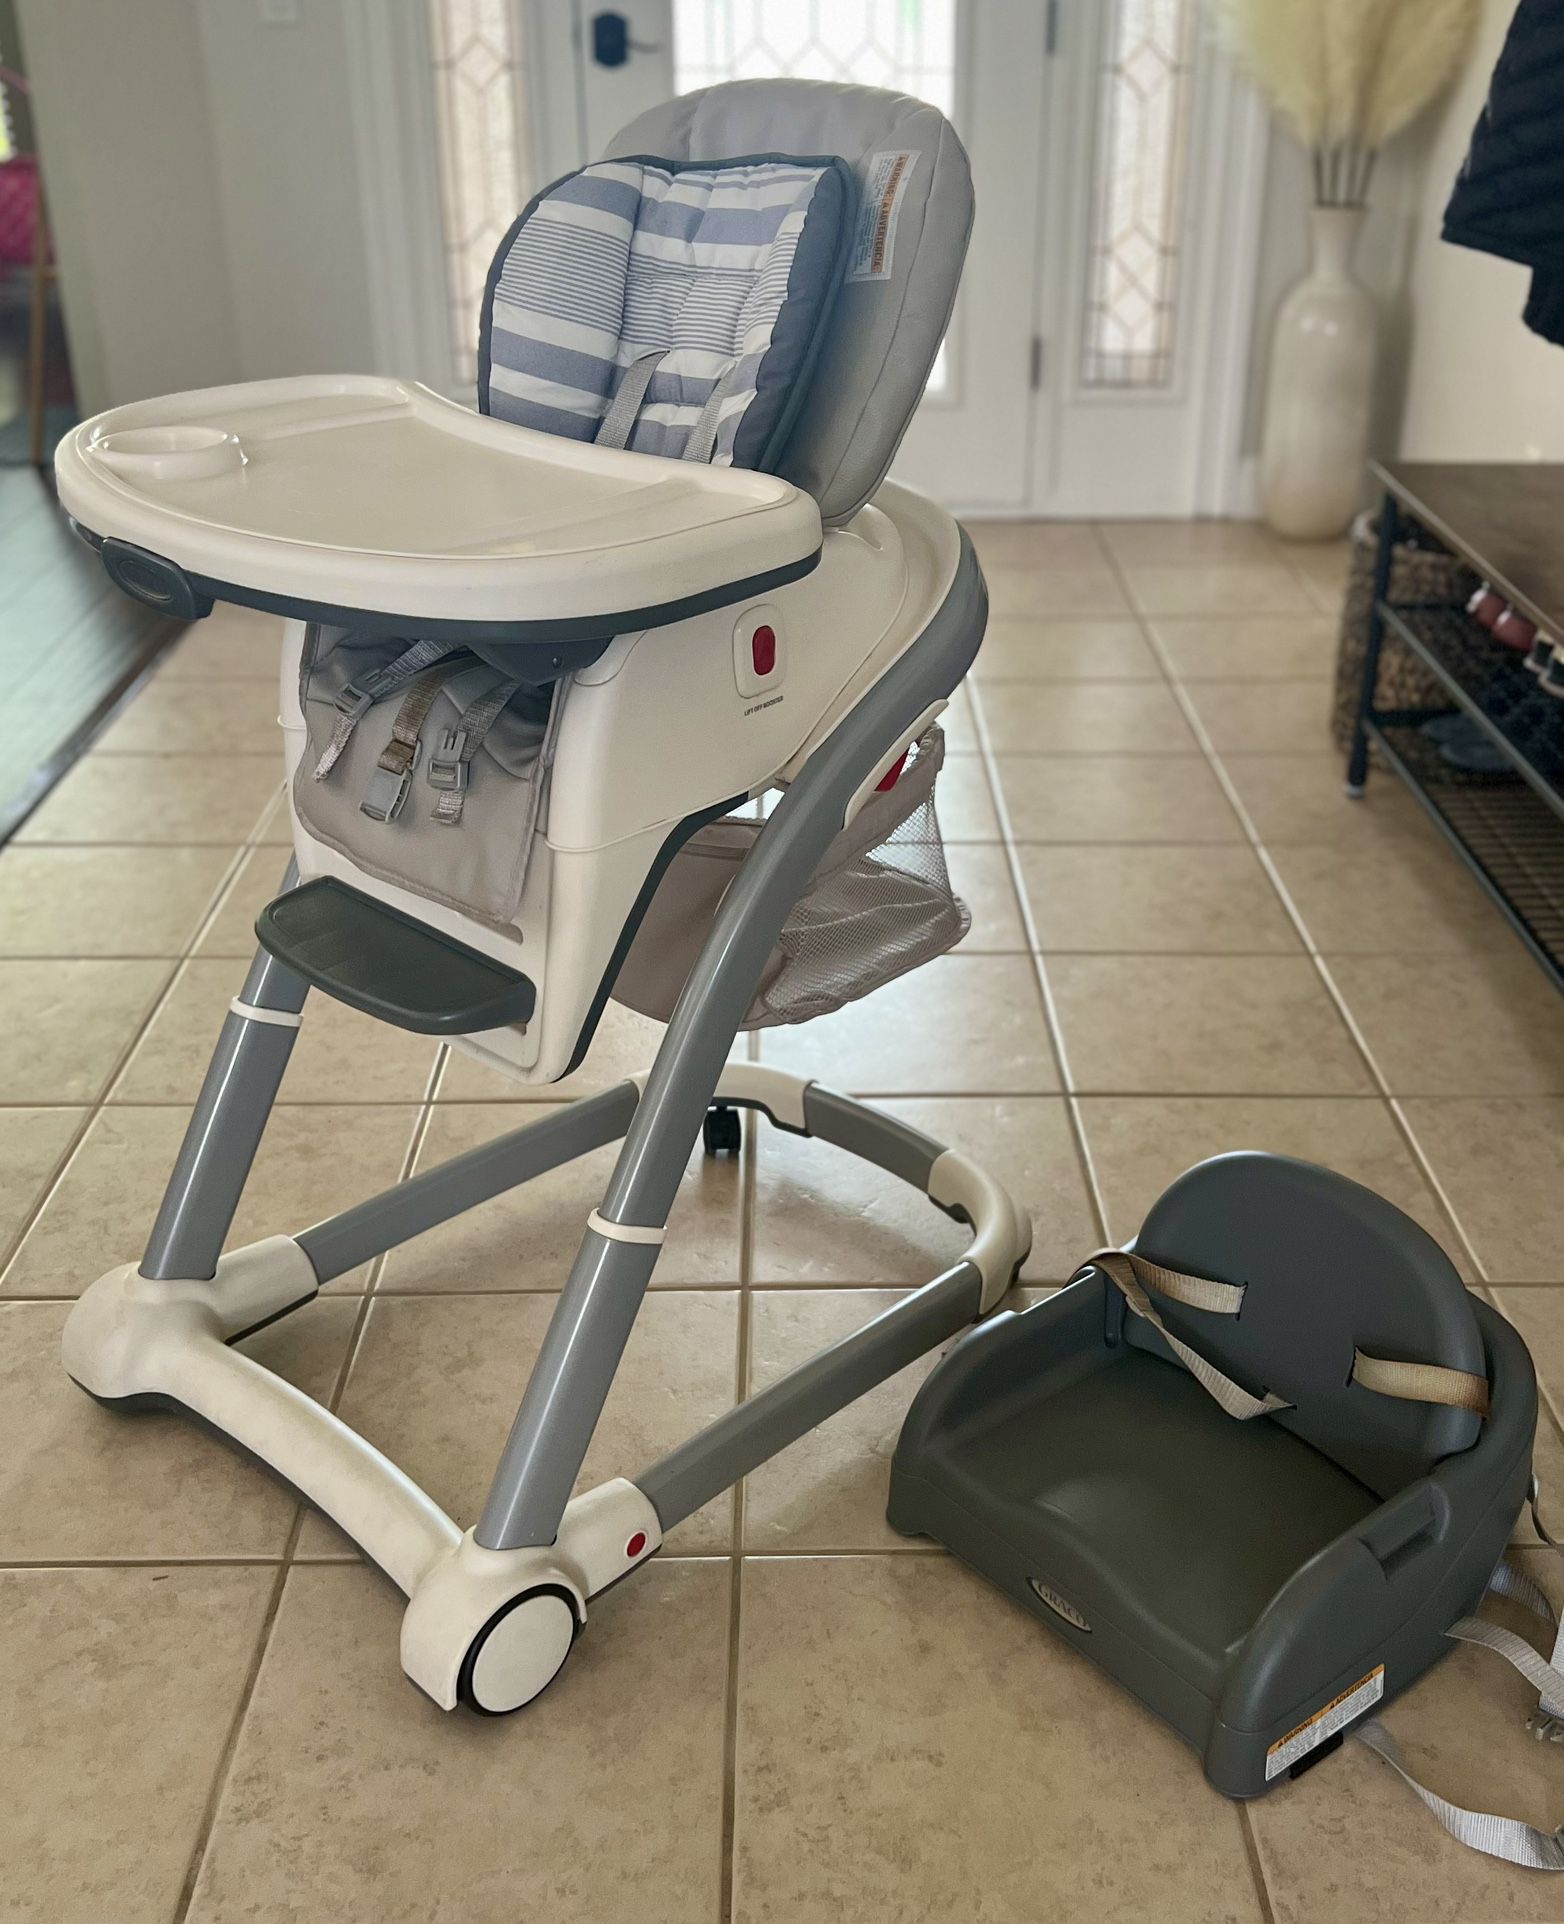 Graco Convertible High Chair With Booster